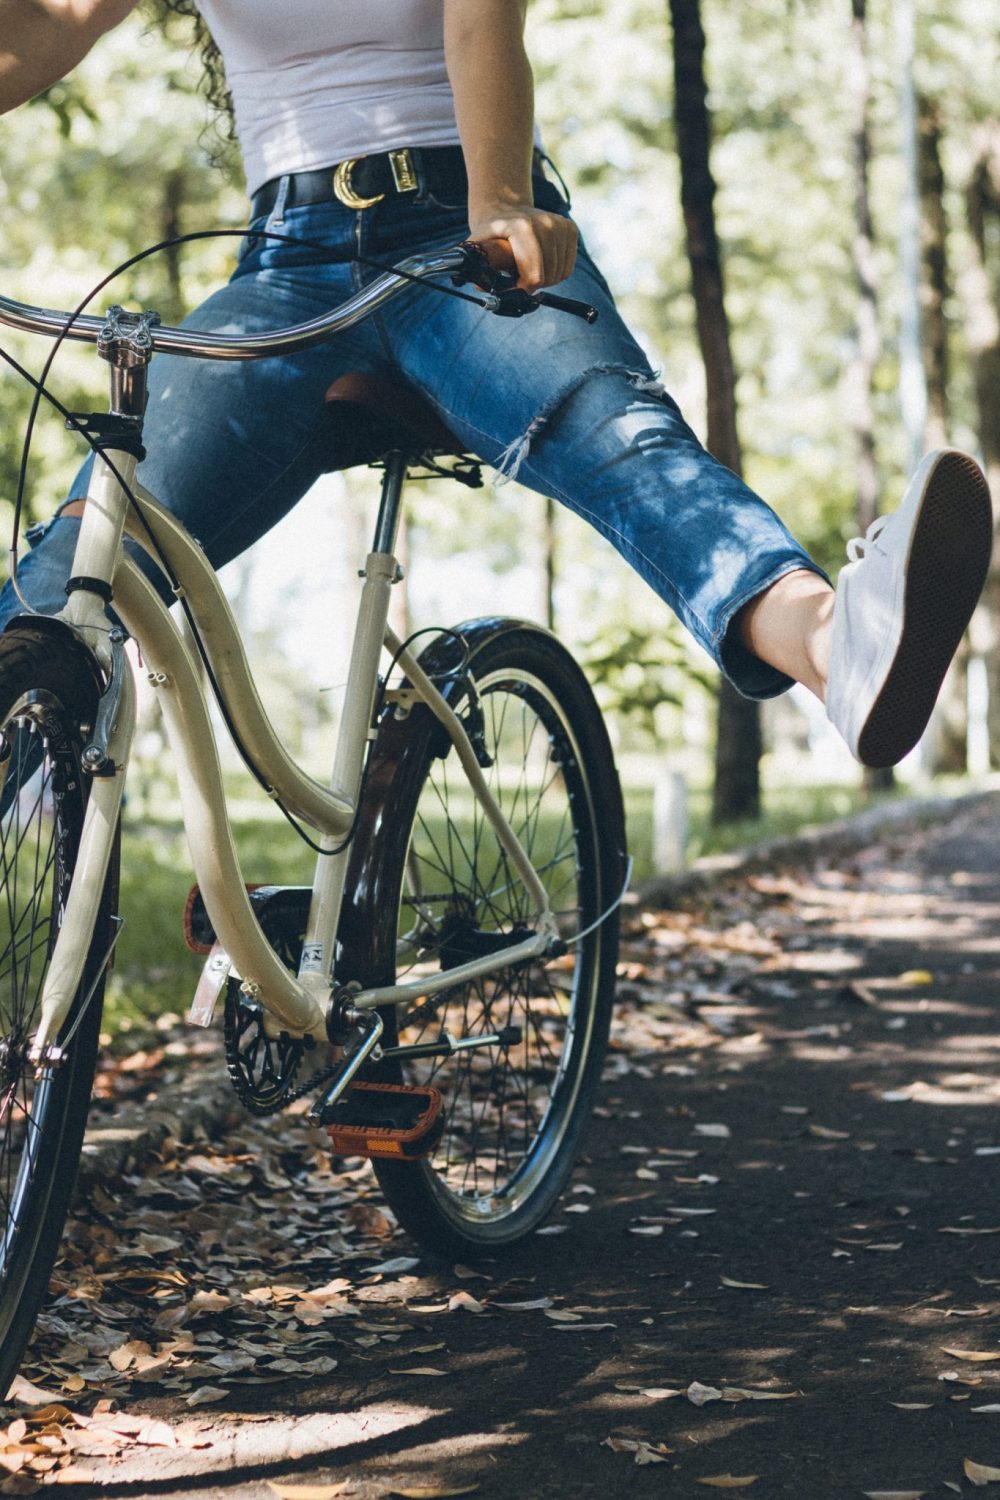 6 Bicycle Safety Tips You (and Your Kids) Should Know